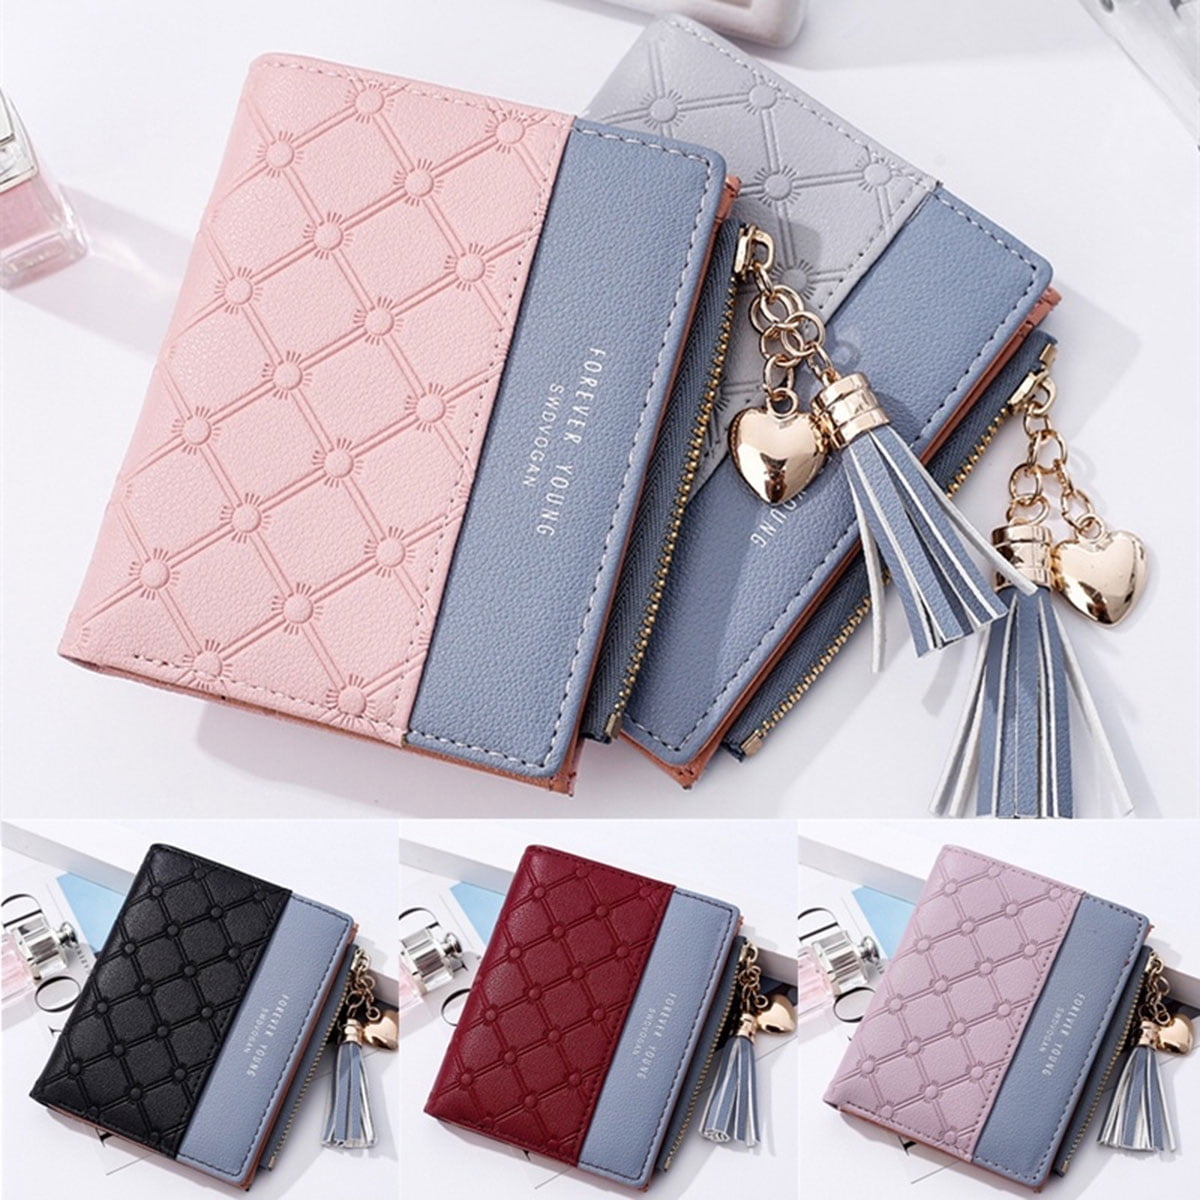 Luxury Brand Wallets Women Leather Wallets Female Long Coin Purses Ladies  Money Credit Card Holders Large Capacity Clutch Bags - OnshopDeals.Com